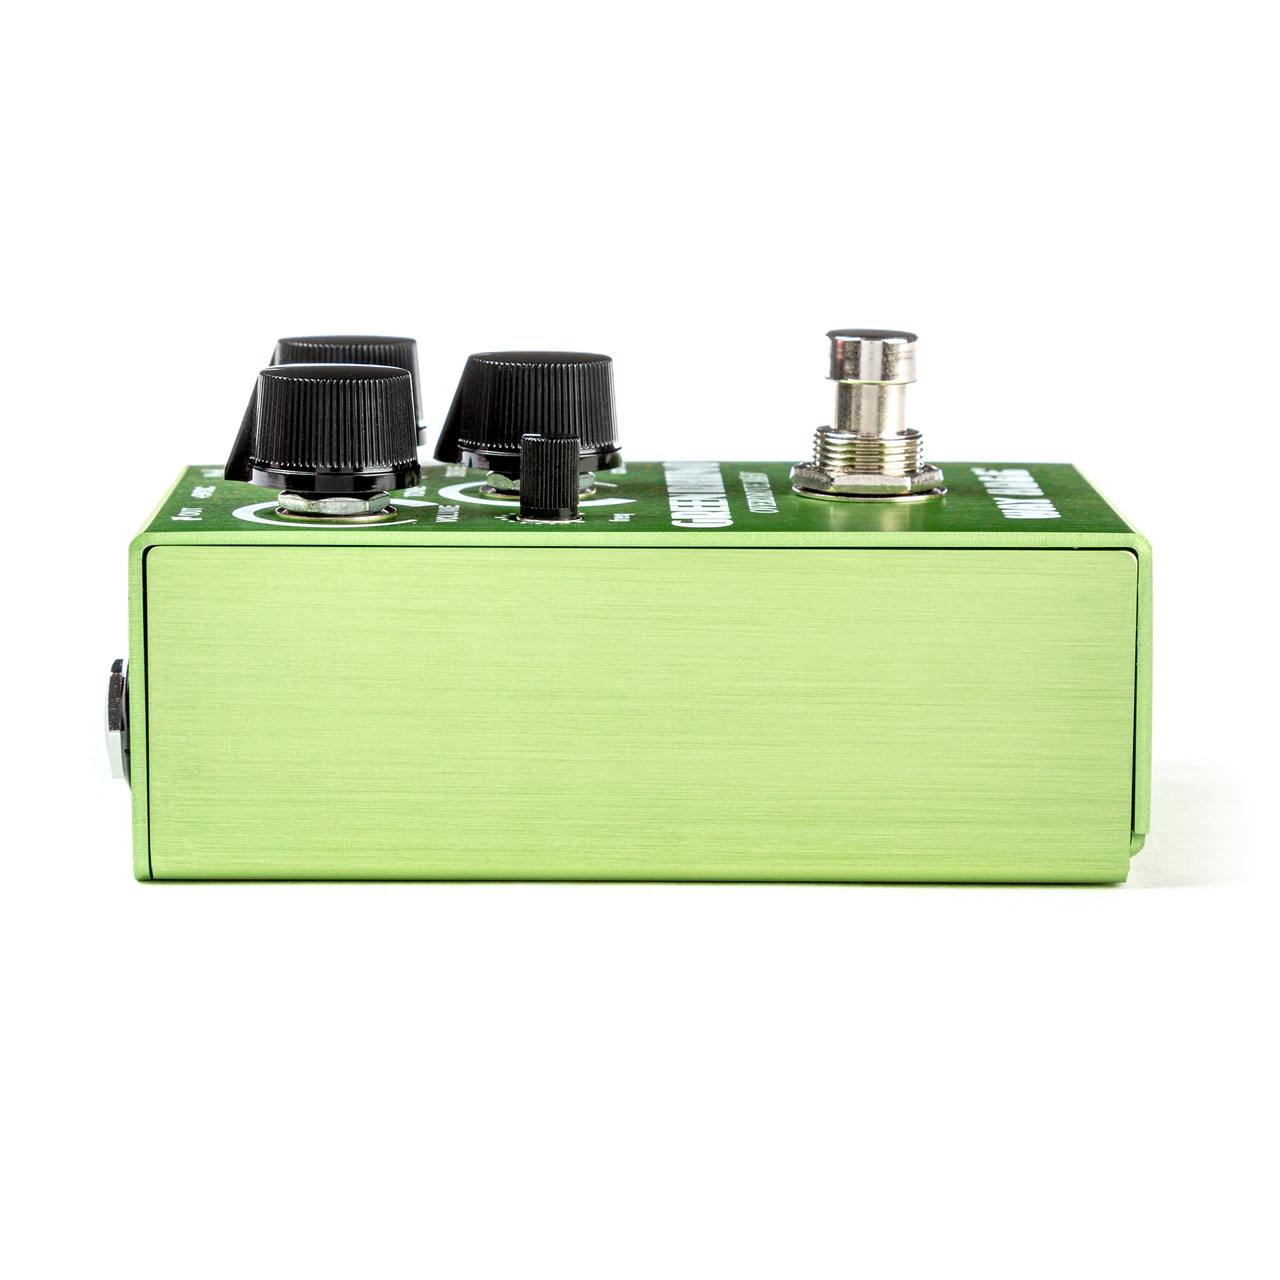 Huge　Pedal　MKV　Way　Green　Music　Rhino　Smalls　Andertons　Overdrive　Co.